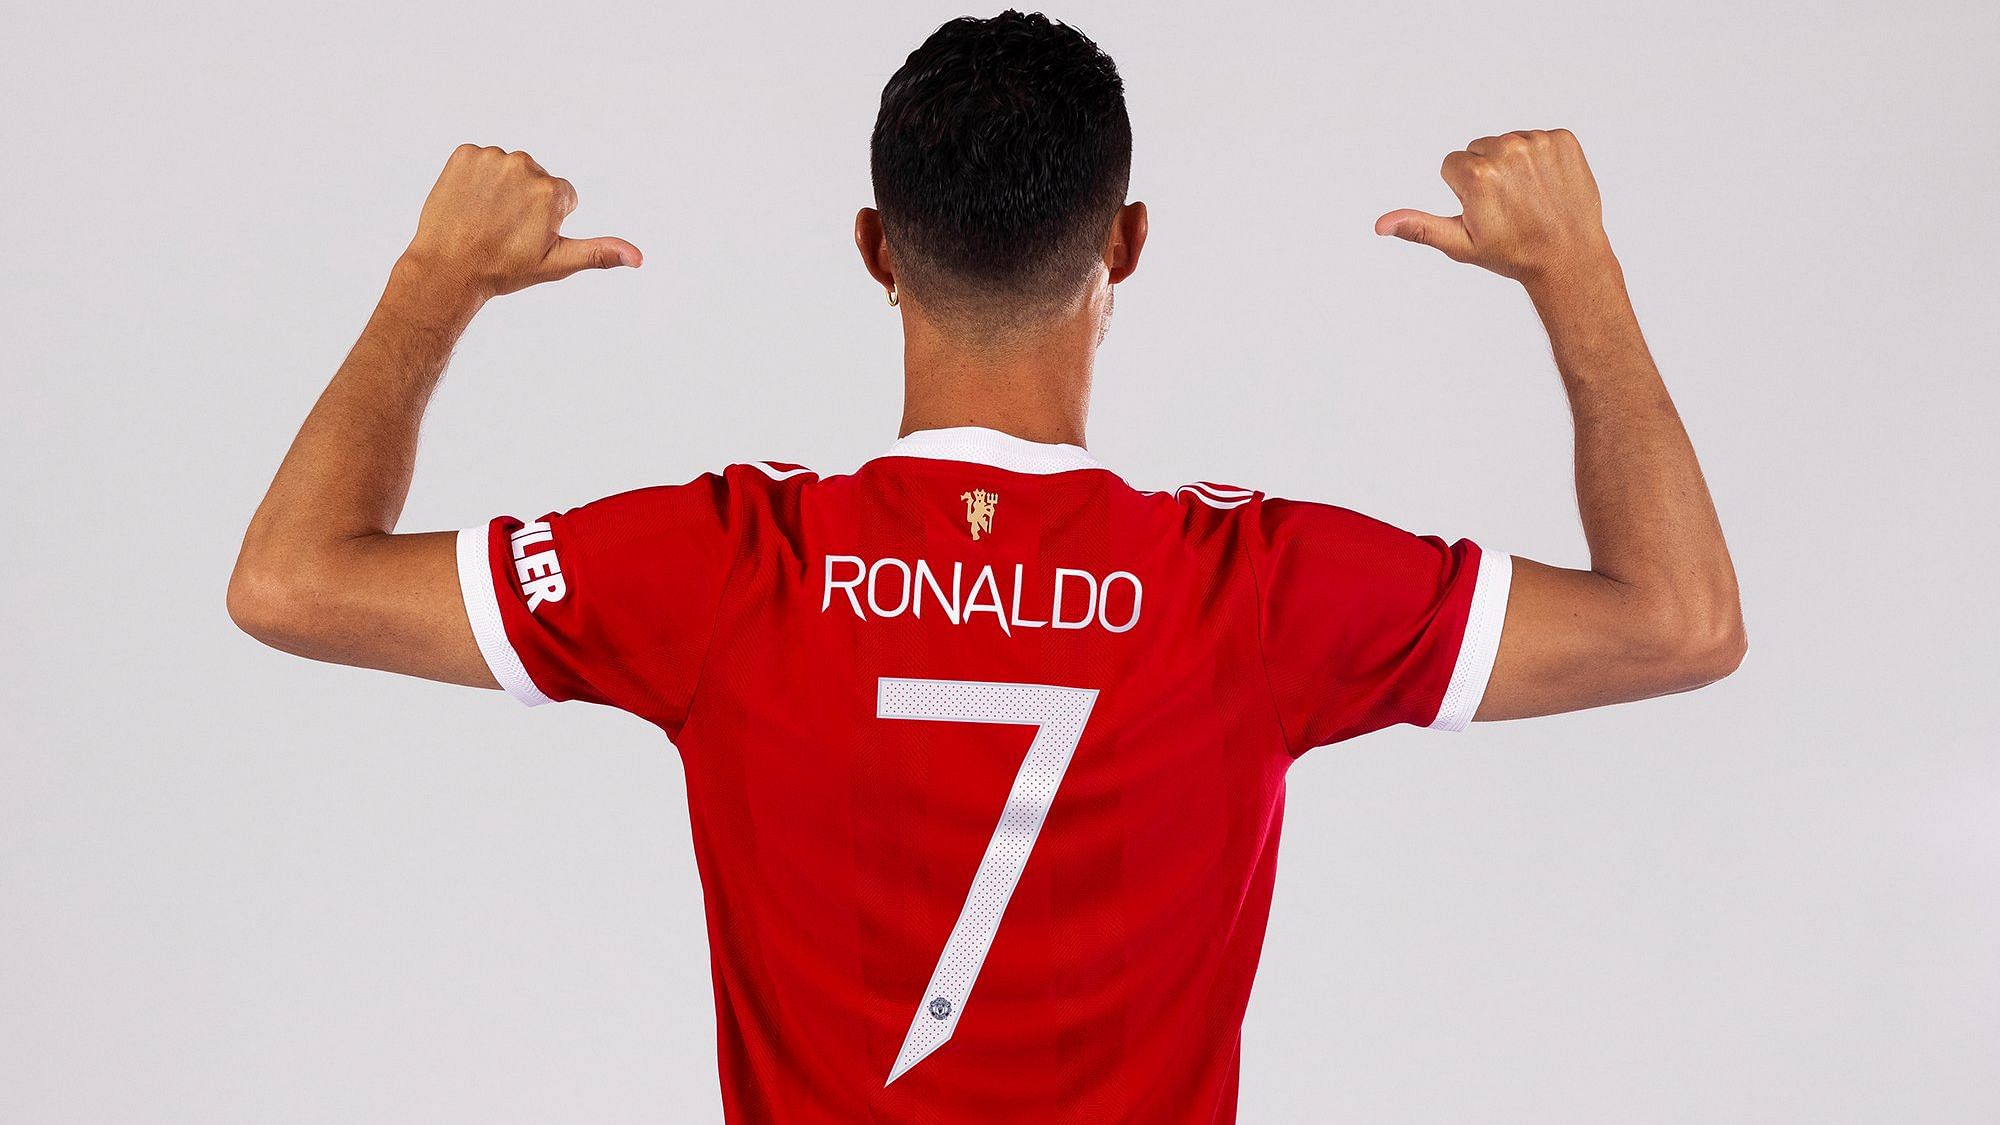 Cristiano Ronaldo Gets Number 7 at Manchester United